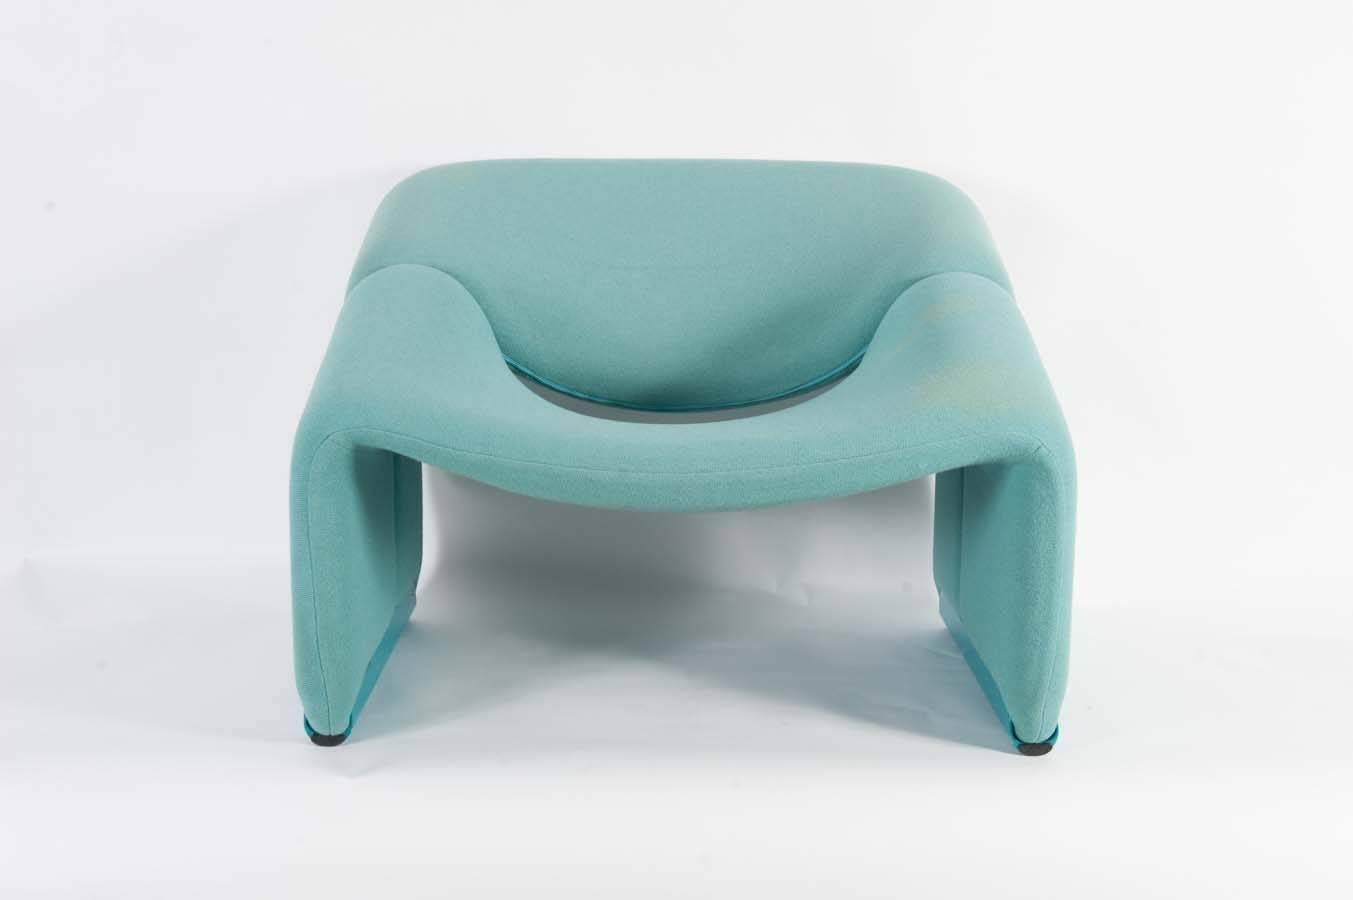 The Groovy Chair is one of the most enigmatic chairs by French star designer Pierre Paulin. It dates form 1972.

This pair still has its original mint green upholstery, with the base in a matching green.